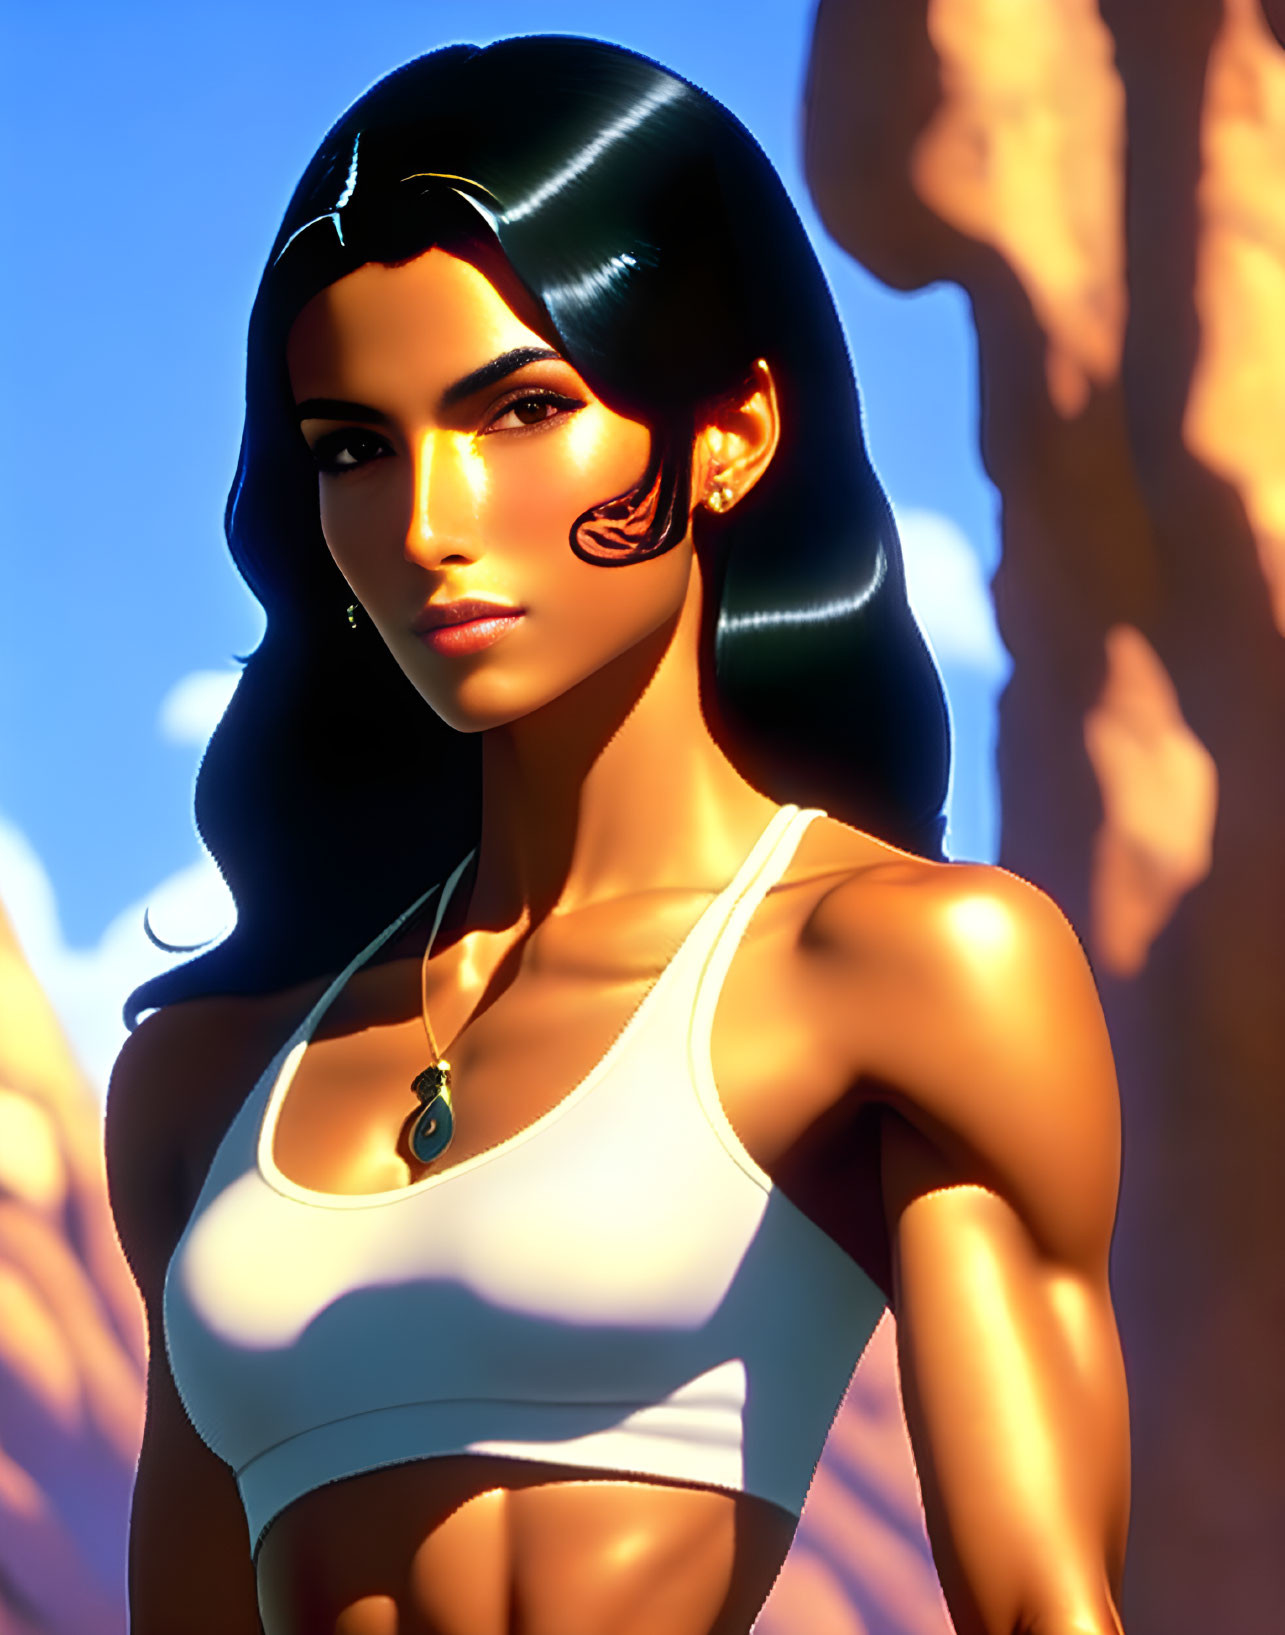 Sleek black-haired animated character with eye tattoo in white tank top